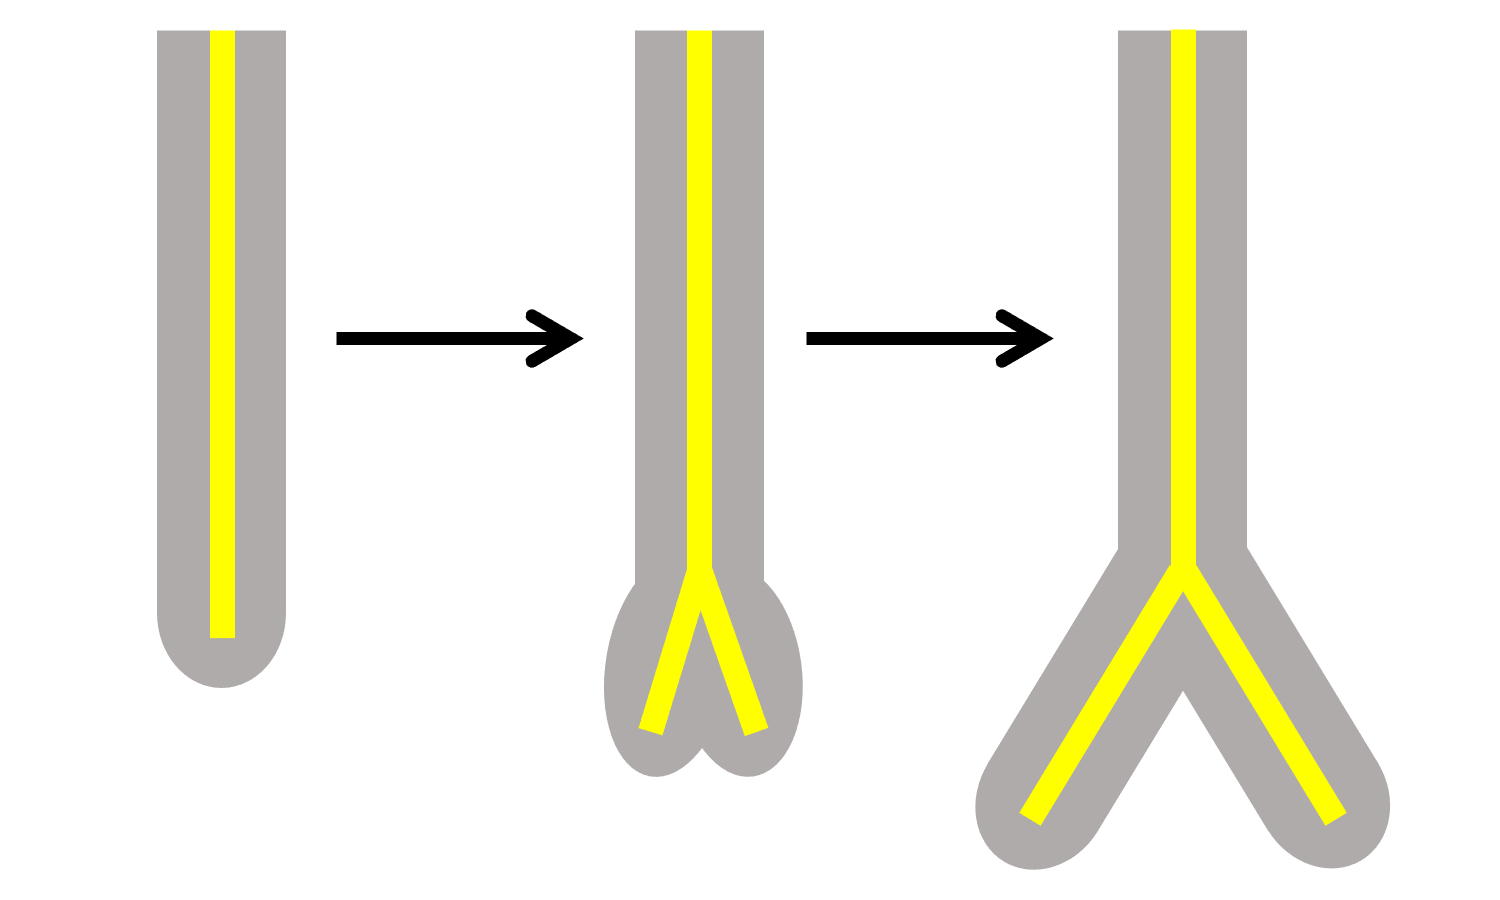 3-Part diagram showing apical branching in a root. Part 1: Single root axis with central vascular tissue. Part two: Root tip and internal vascular tissue begin to fork. Part 3. Lateral two branches develop further, forming an equal dichotomy.